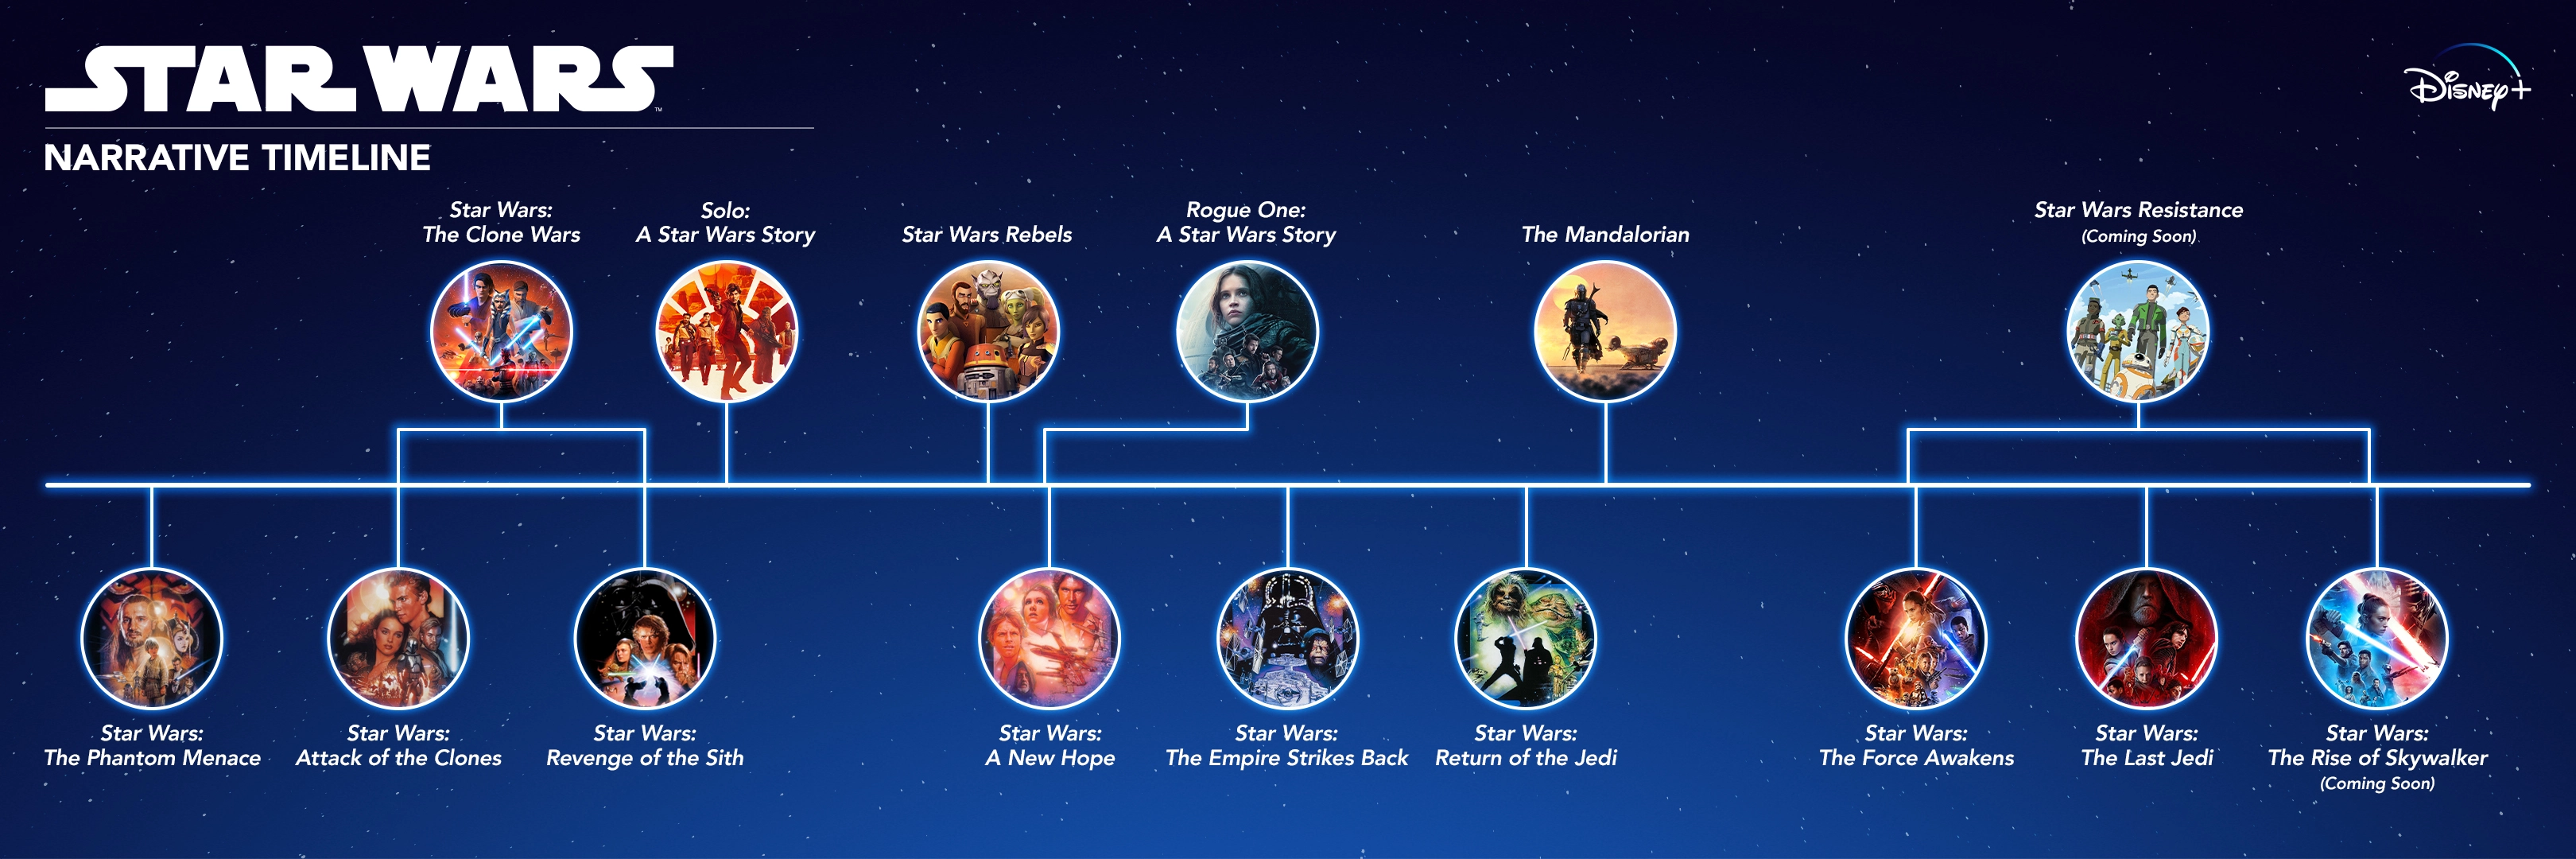 A Chronological List of Star Wars Movies & TV Shows